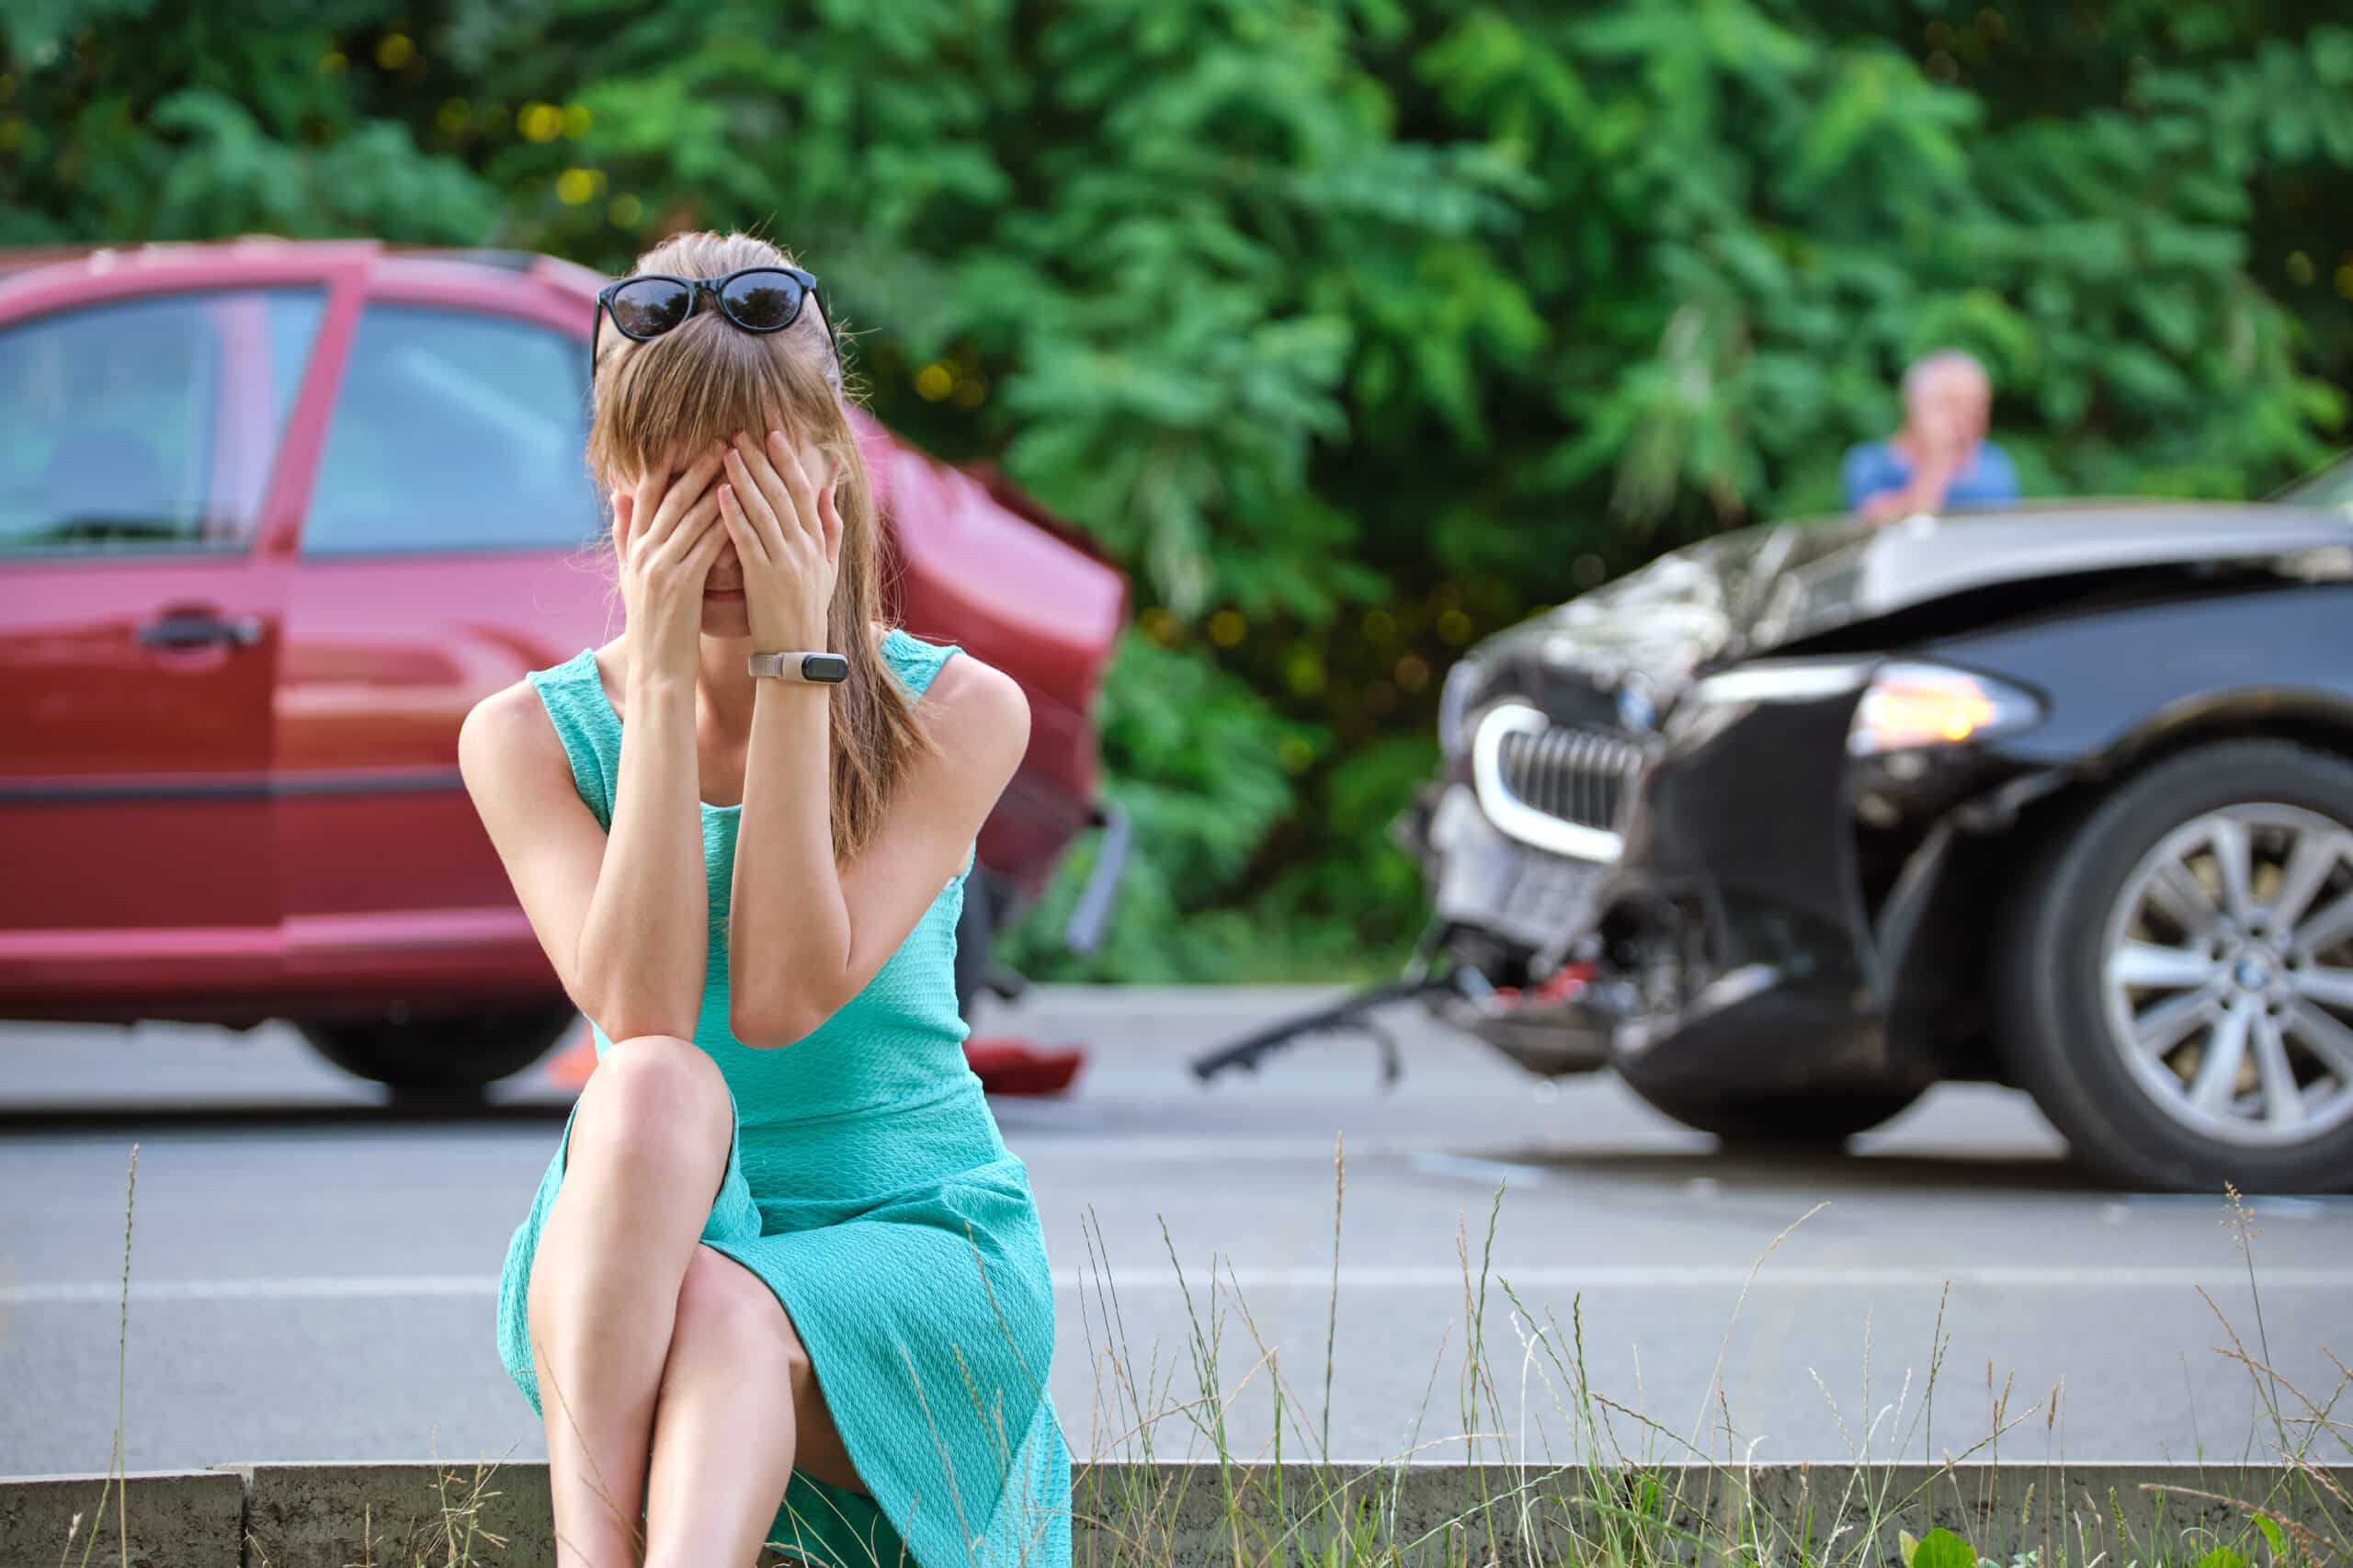 Prove Fault in Car Accident